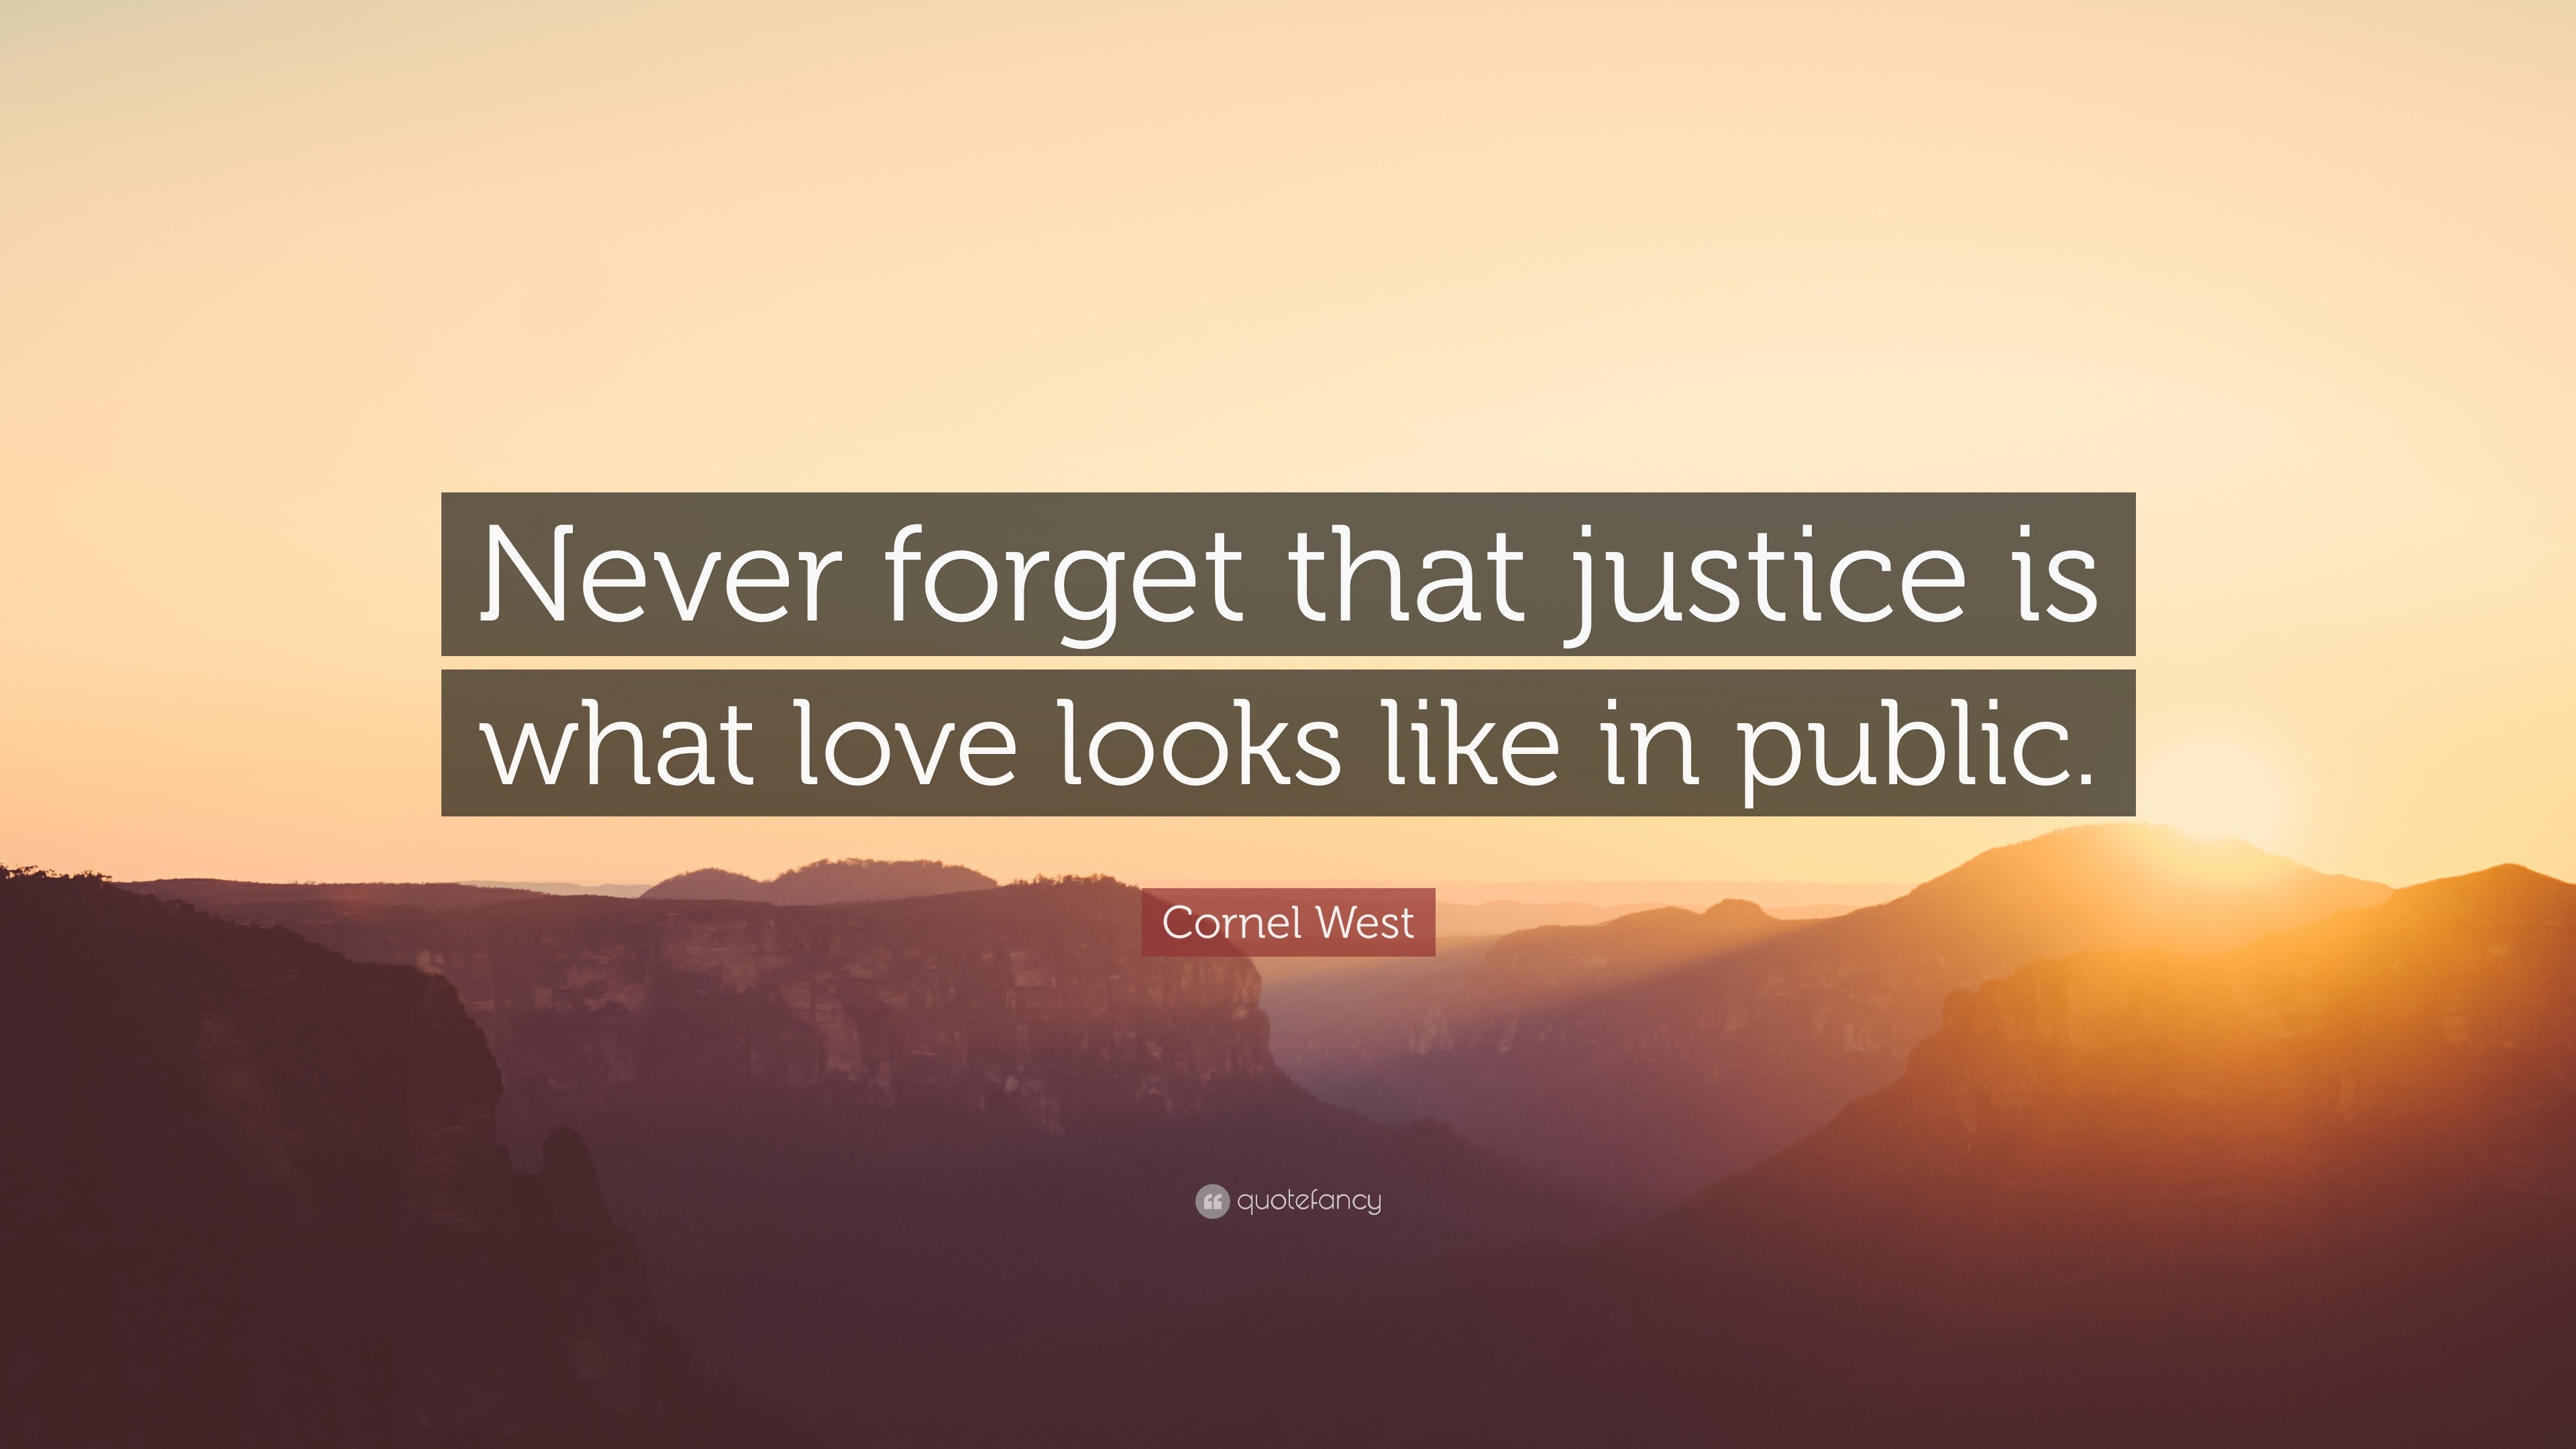 Cornel West Quote “Never for that justice is what love looks like in public